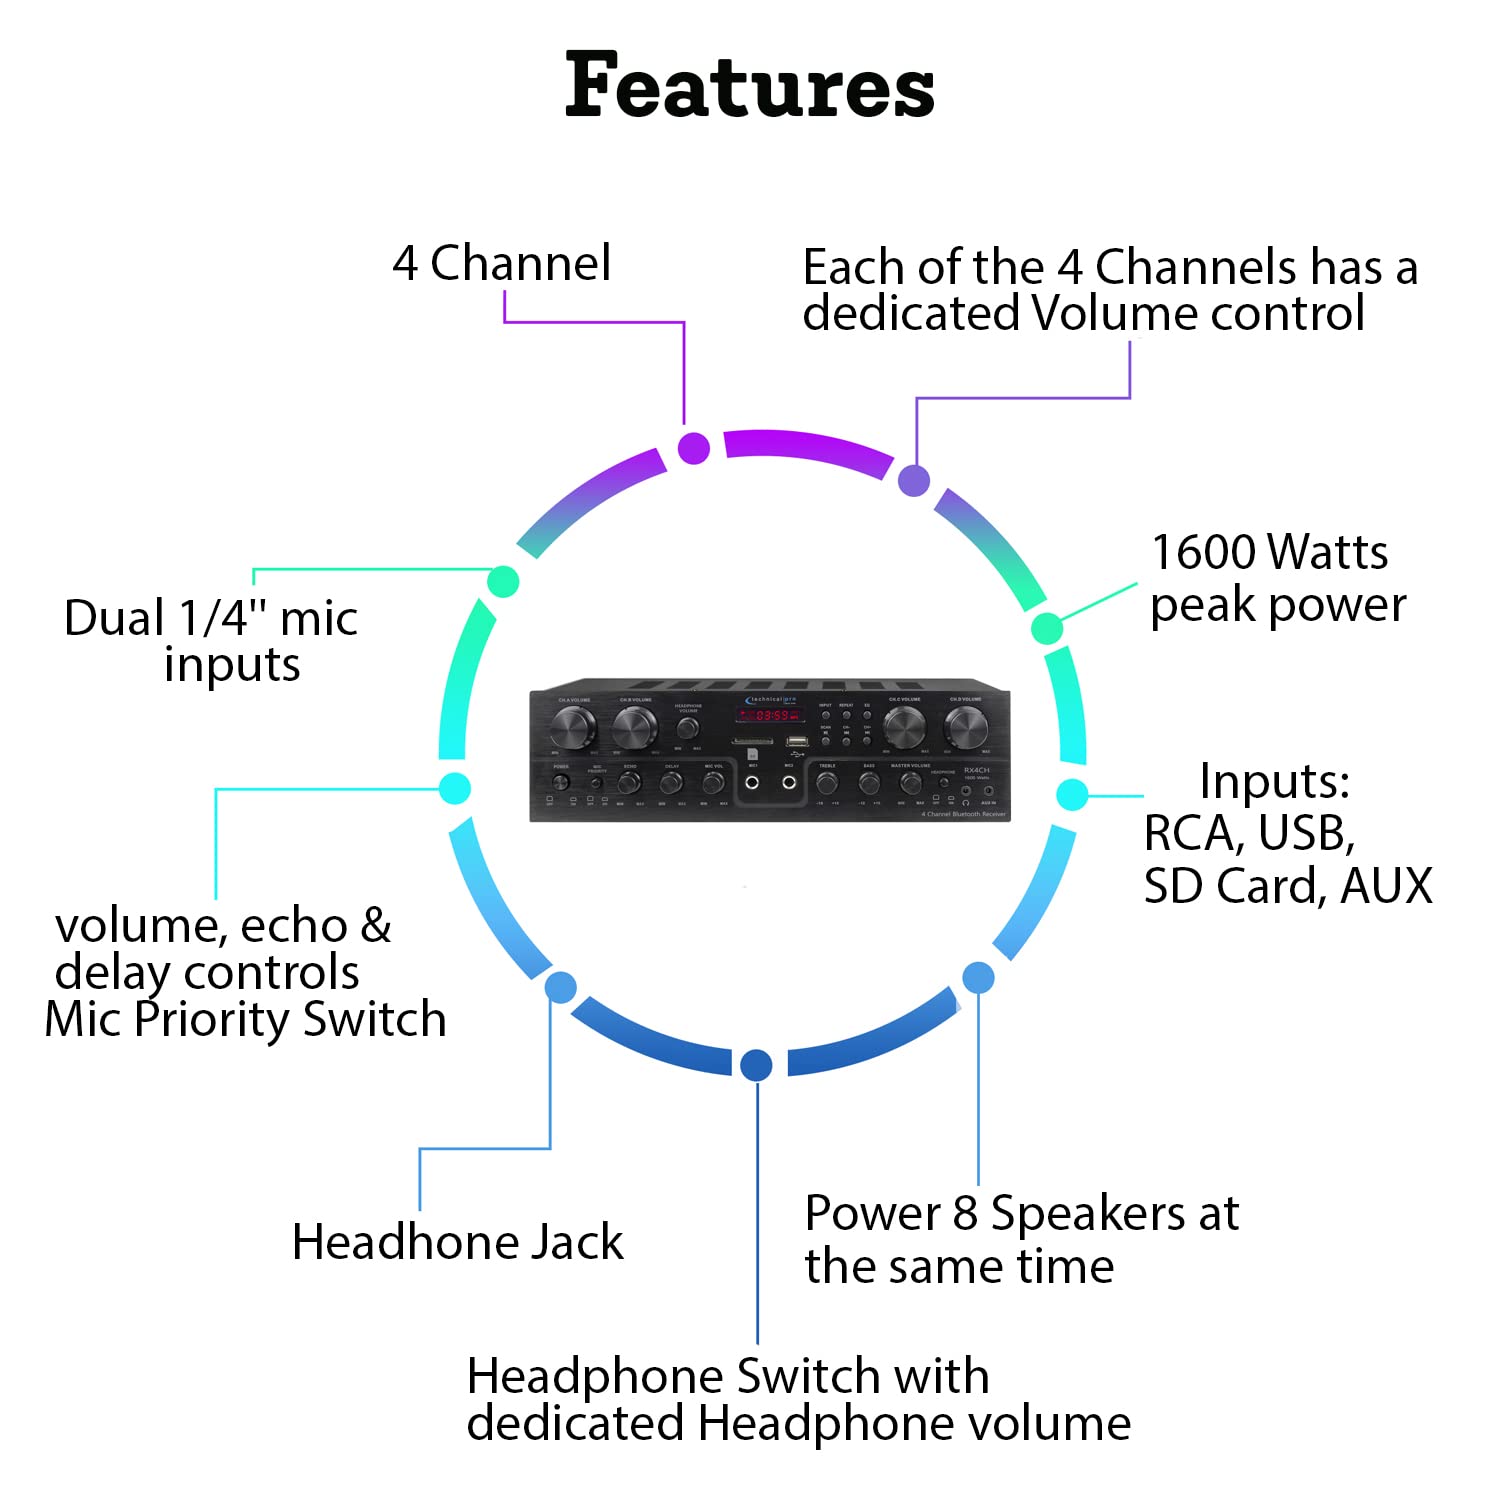 Technical Pro 1600 Watts, 4 Channel, 8 Speaker Bluetooth Receiver with RCA, USB, SD Card, AUX and 2 Mic Inputs, Playback Controls, Fluorescent Display for Home Speakers, Theater System, Karaoke